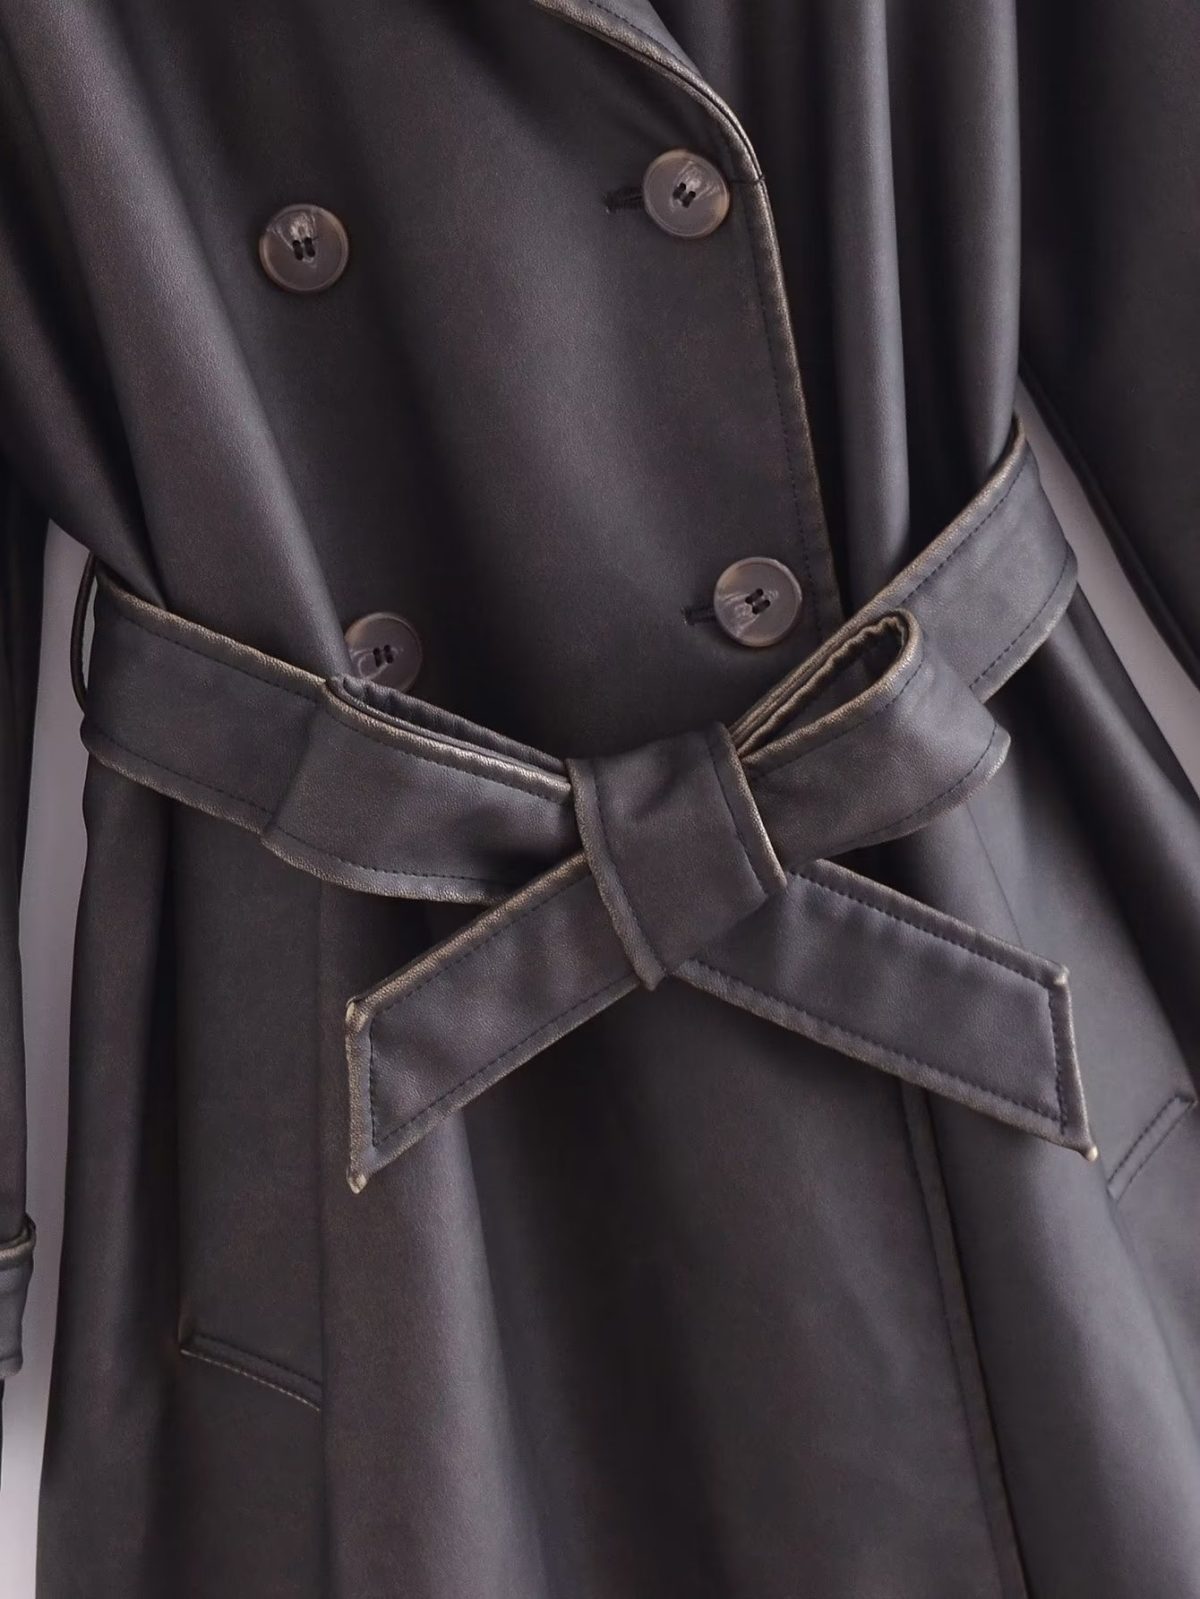 Autumn Winter Long Sleeve Collared Bow Waist Distressed Effect Faux Leather Trench Coat - Coats & Jackets - Uniqistic.com